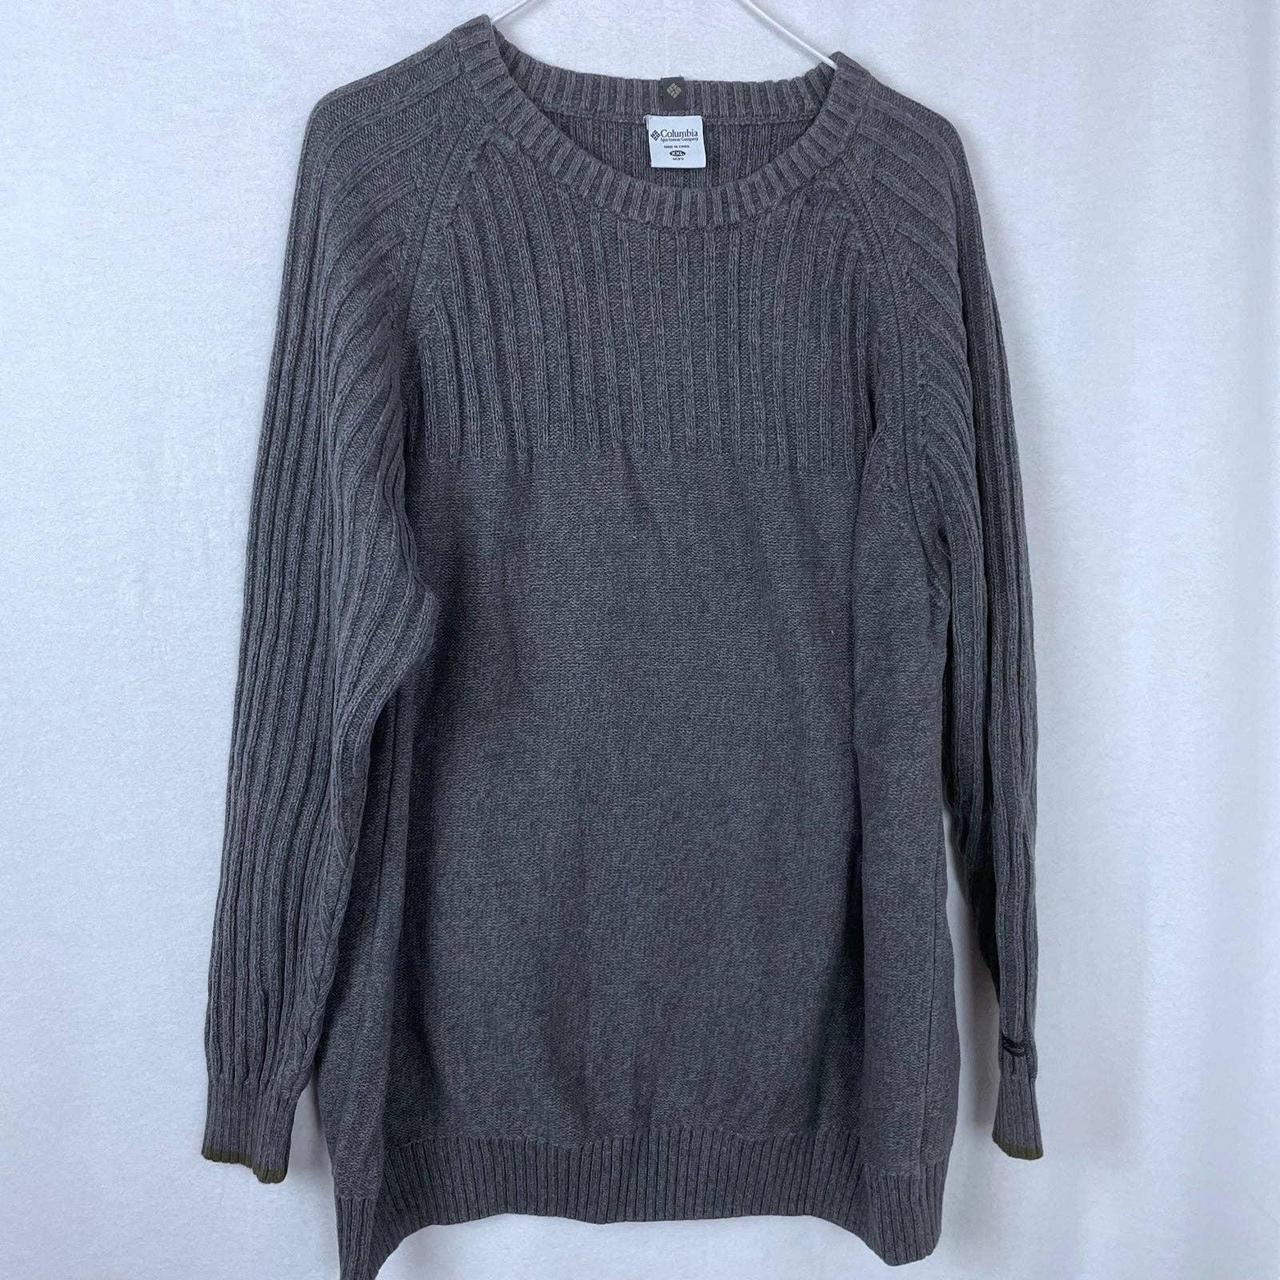 Product Image 1 - Gray Mens Columbia Knit Sweater.